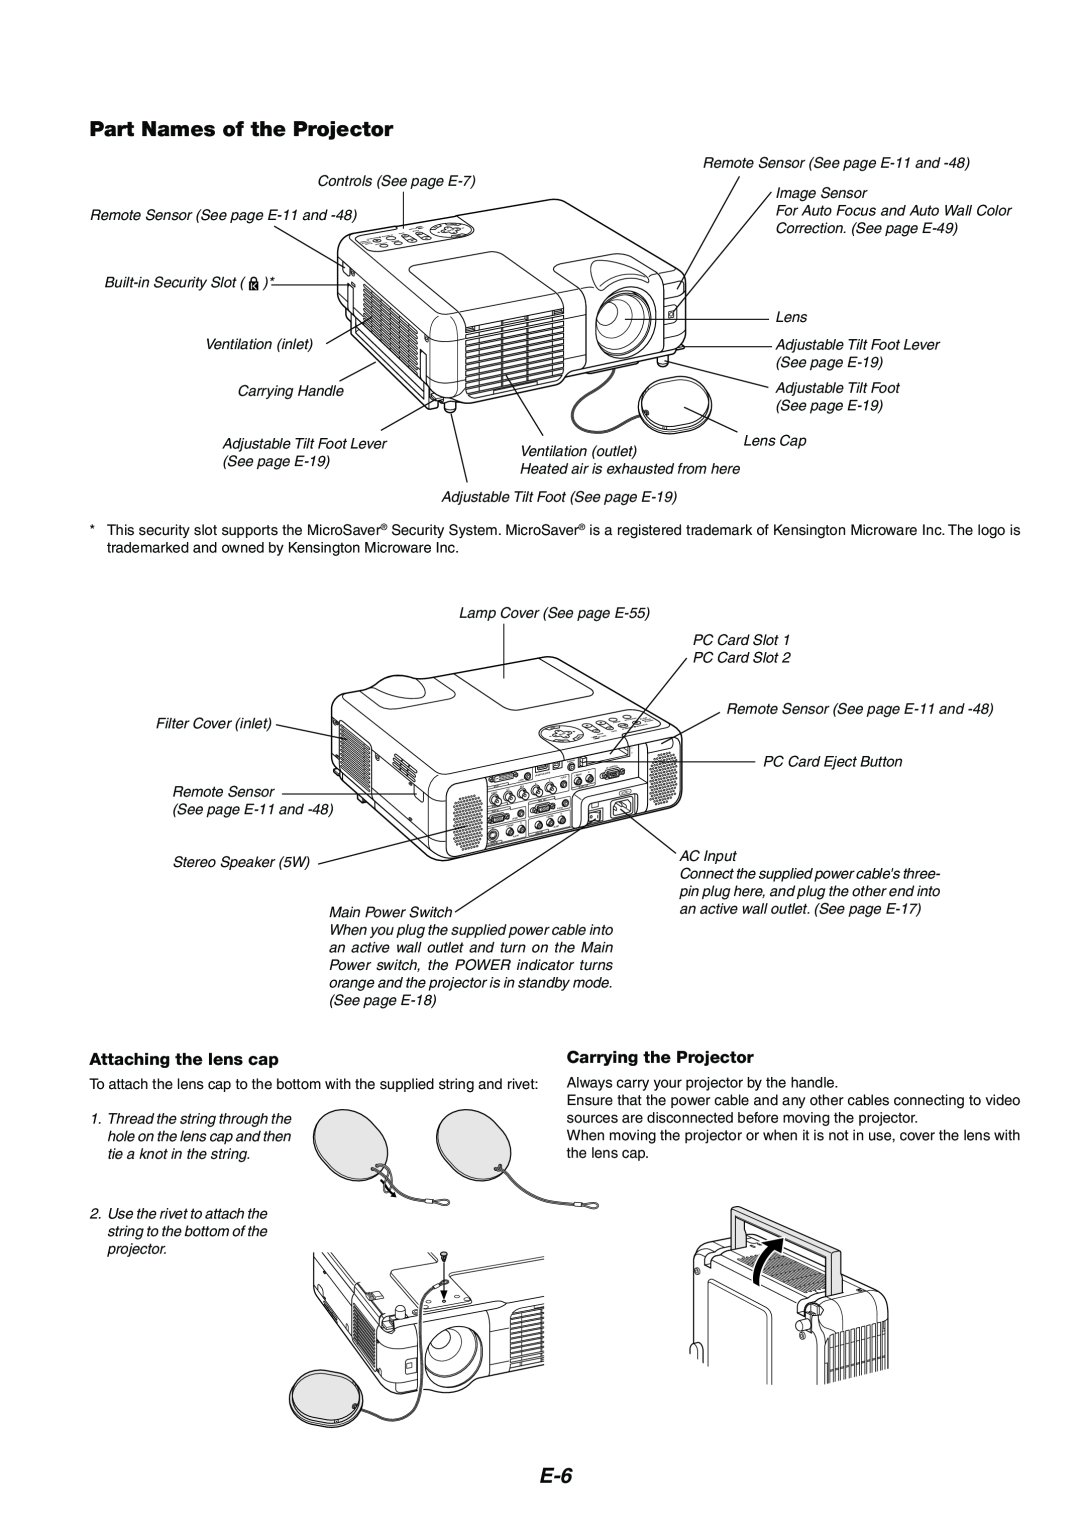 NEC MT1075/MT1065 user manual Part Names of the Projector, Attaching the lens cap, Carrying the Projector 